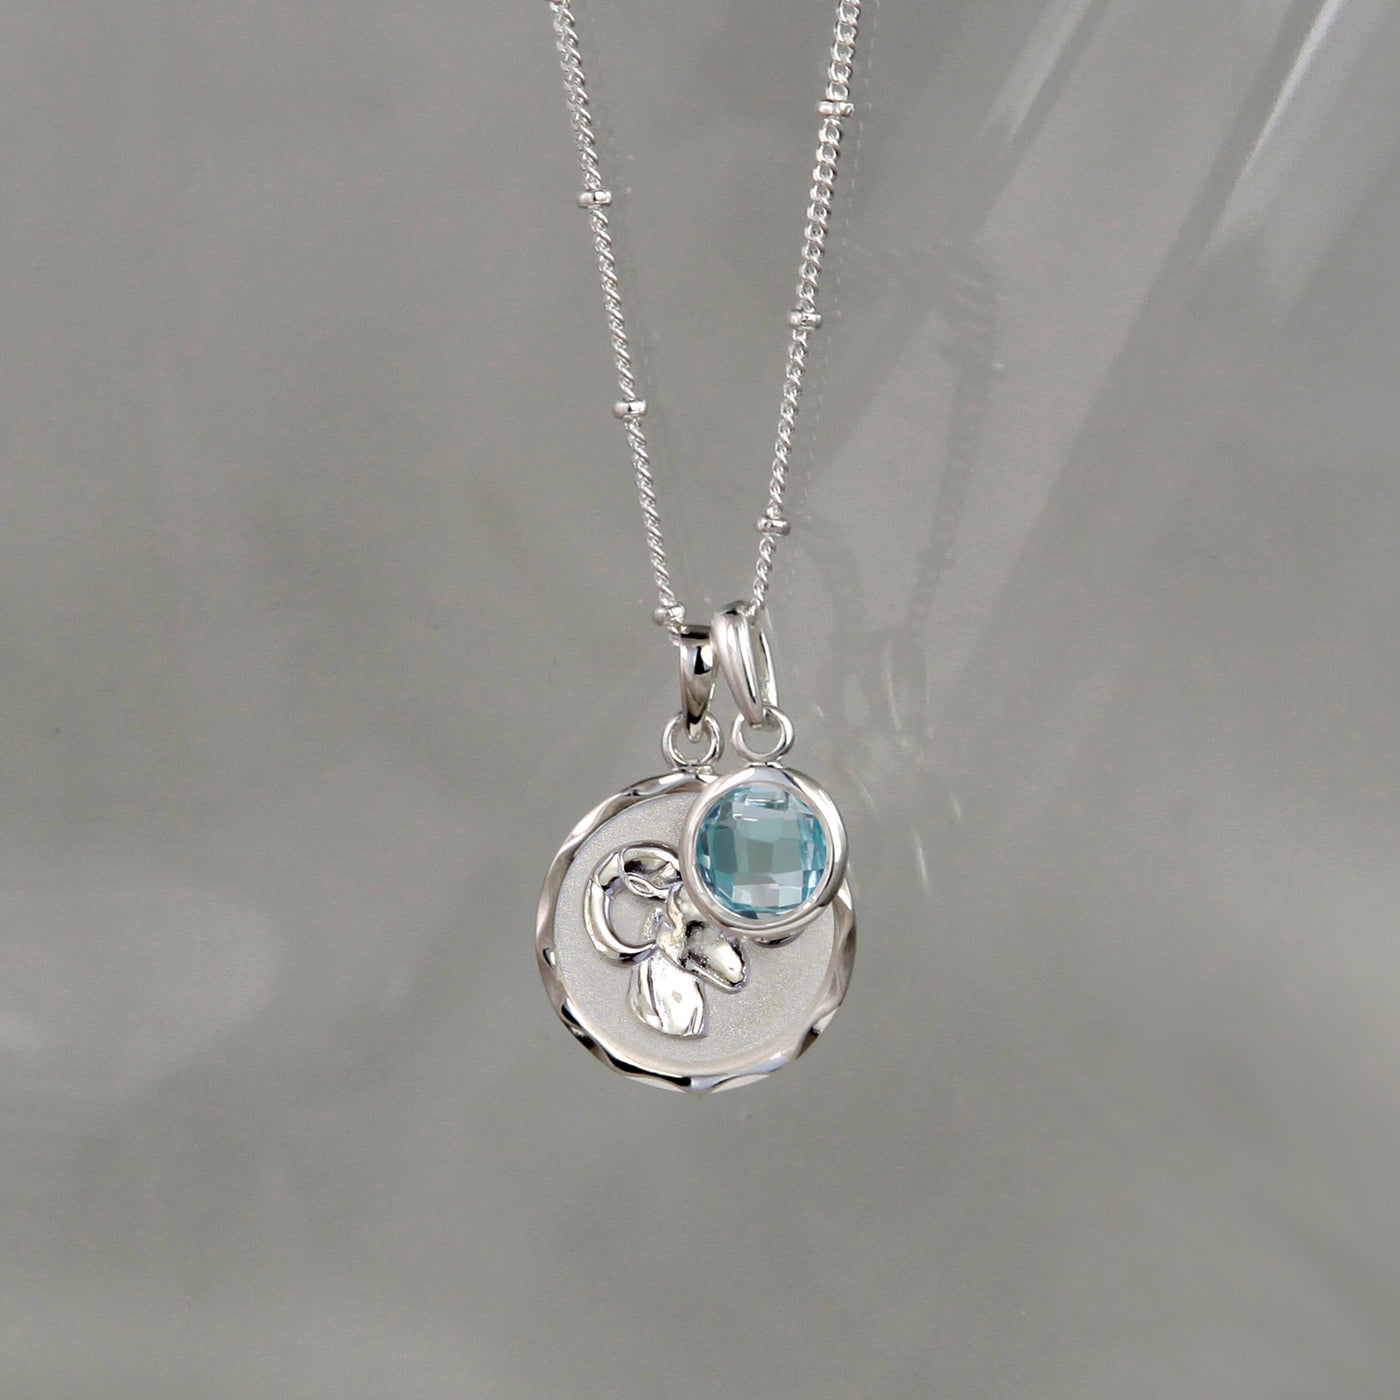 Silver Aries Zodiac Star Sign Necklace with birthstone